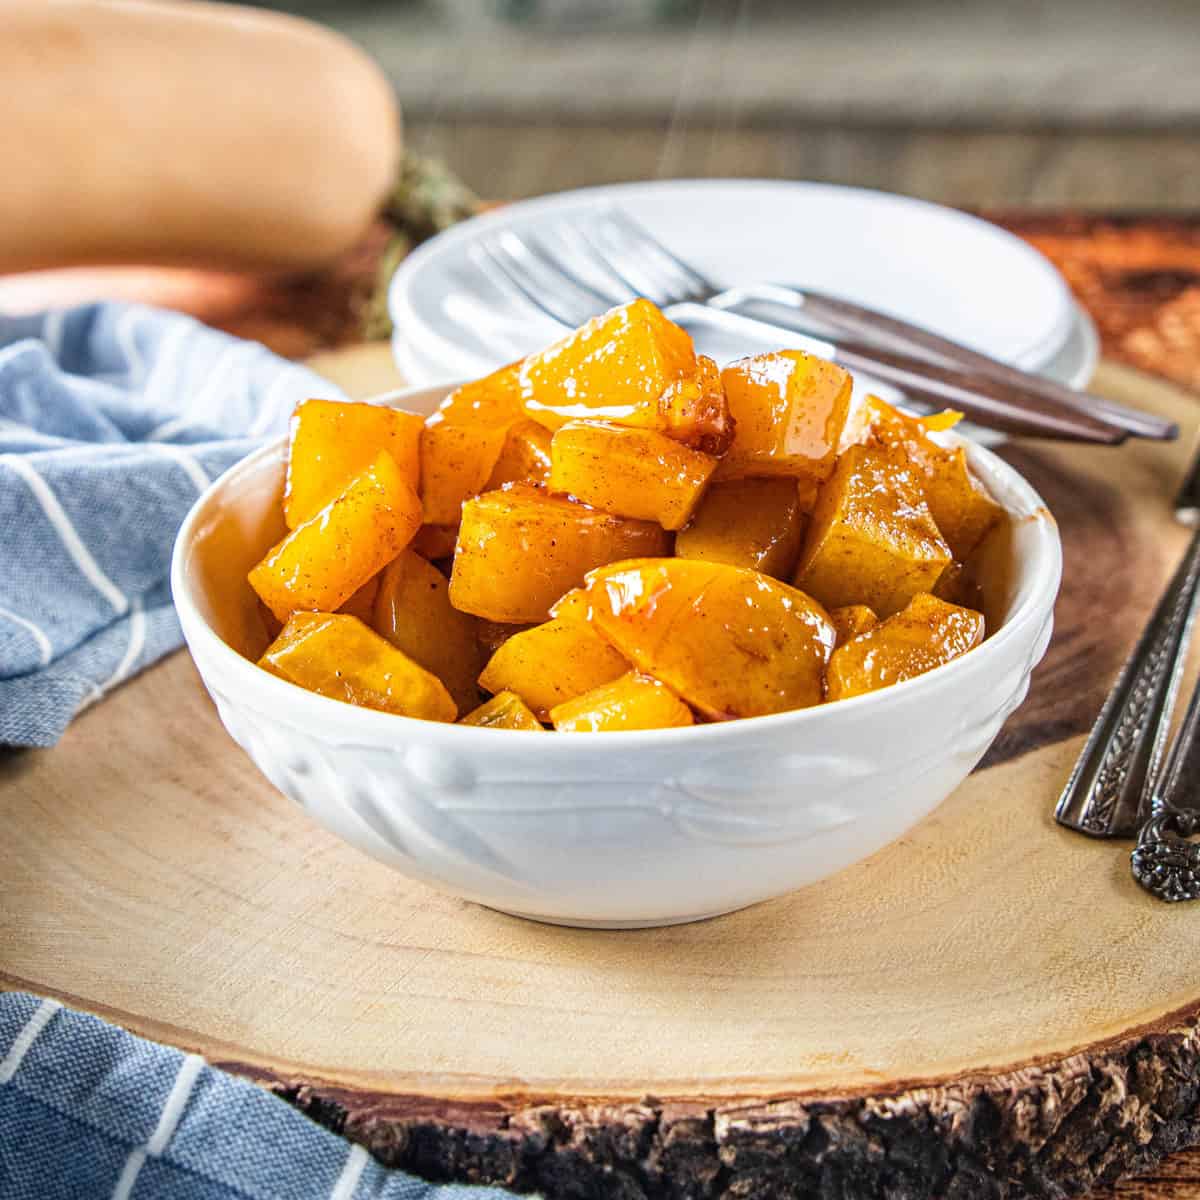 Maple roasted butternut squash in a white serving bowl on top of a wood plank with silverware and a dish towel around the bowl.